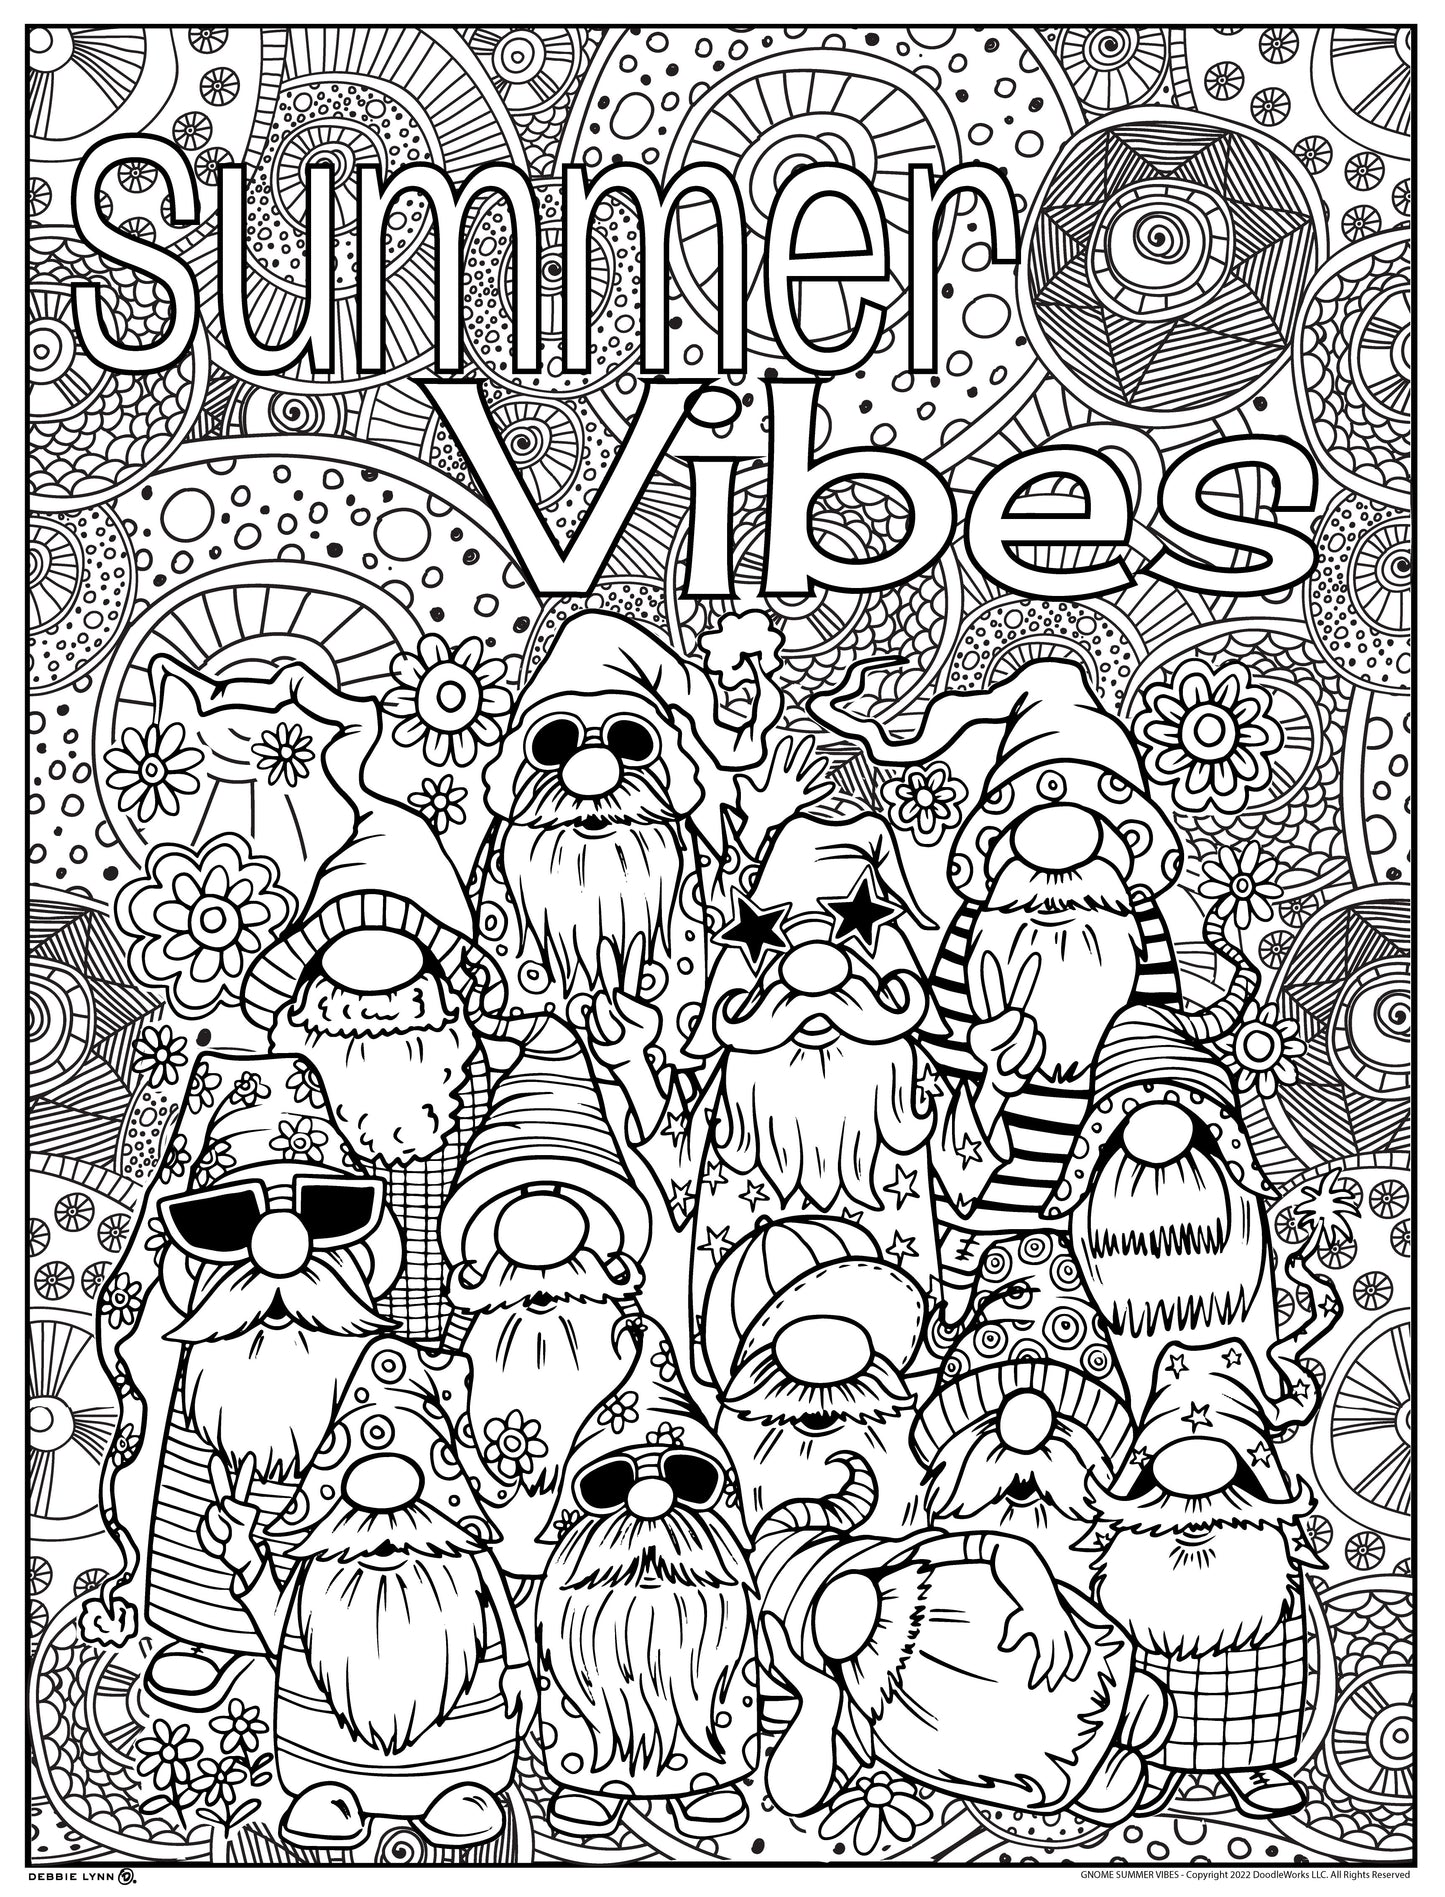 Gnome Summer Vibes Personalized Giant Coloring Poster 46"x60"